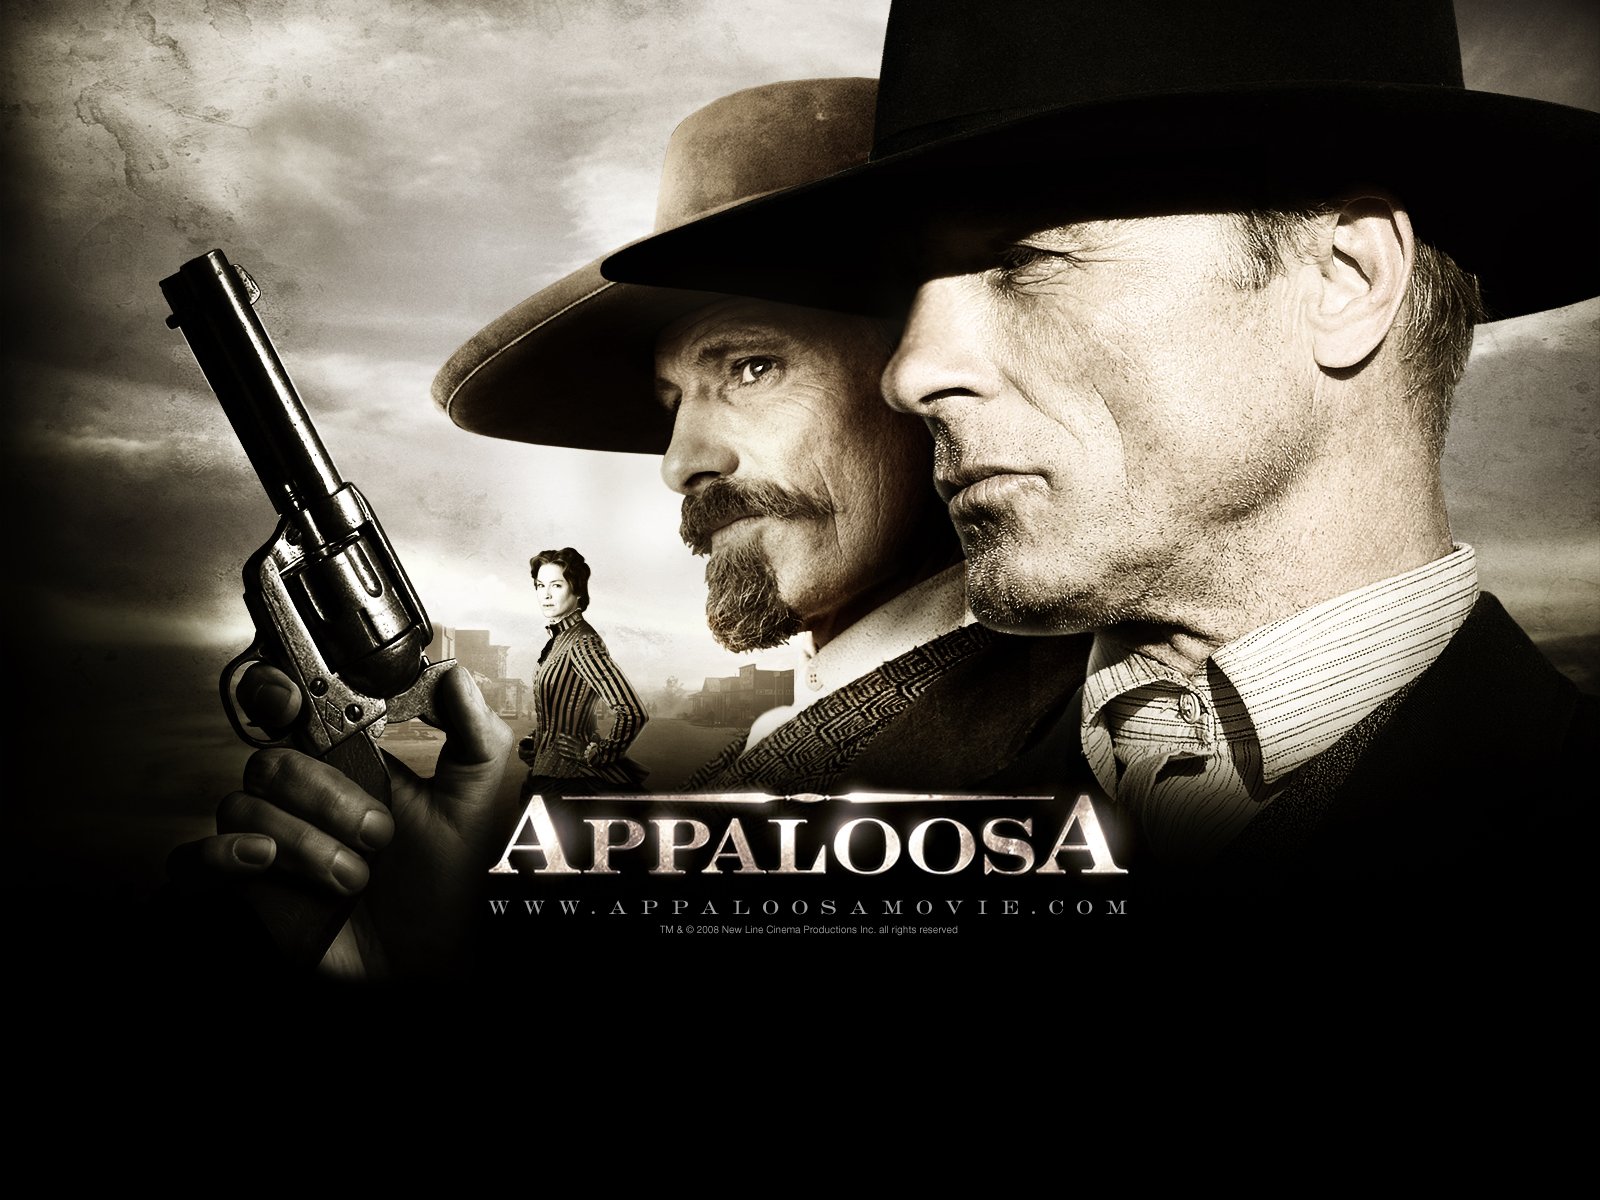 44-facts-about-the-movie-appaloosa